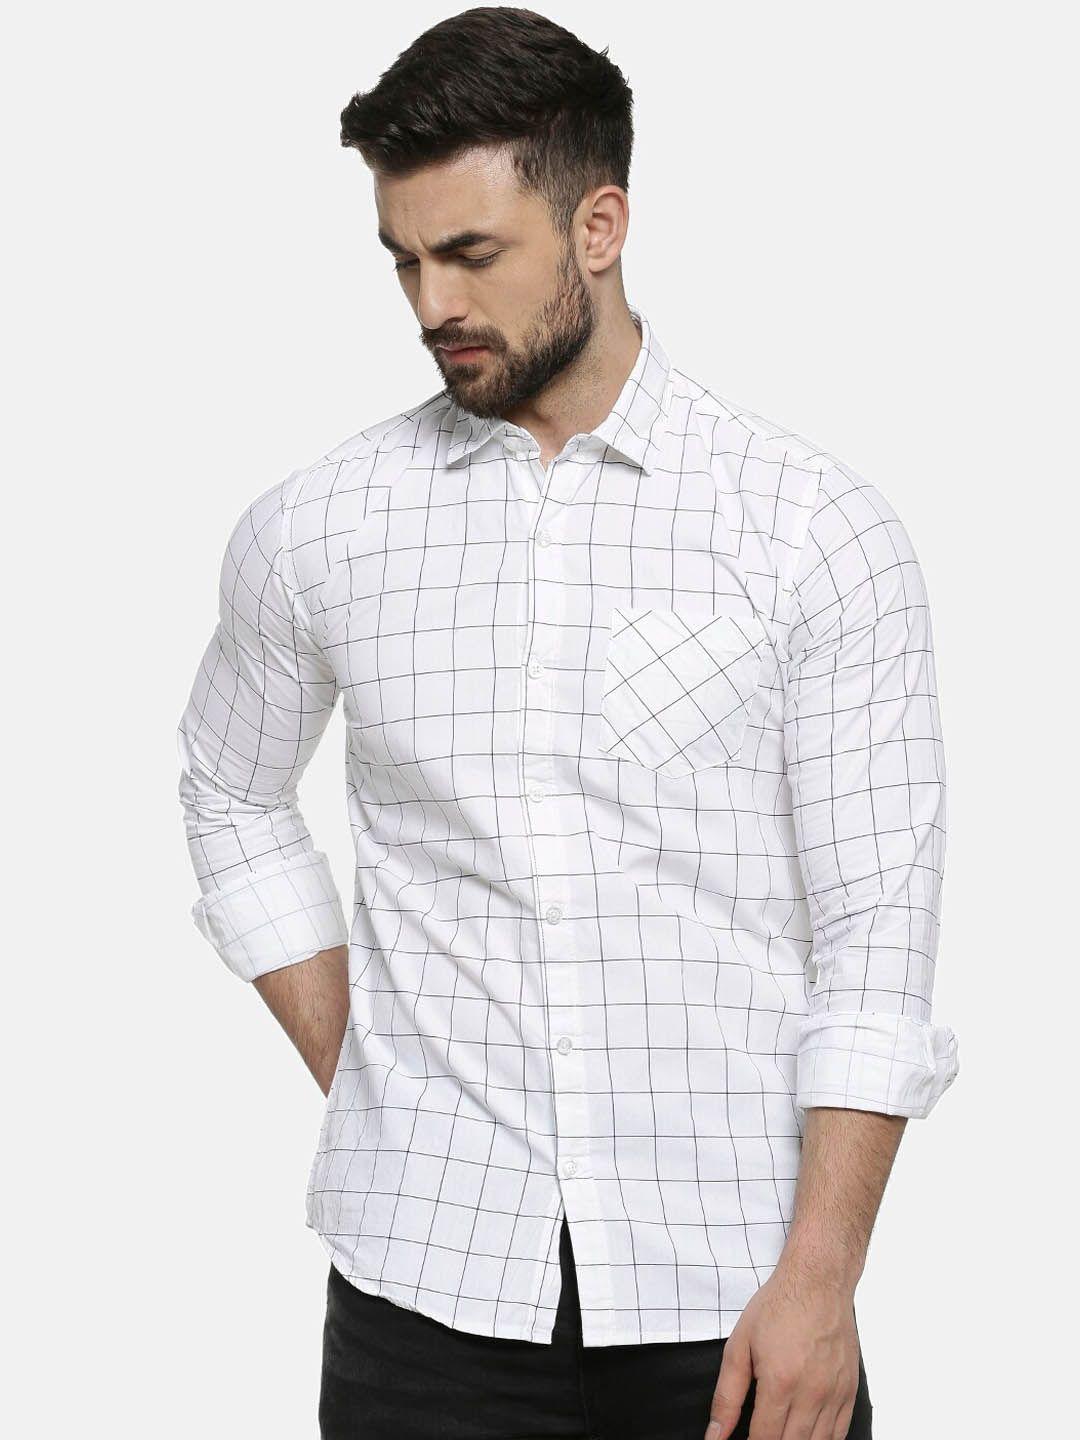 campus-sutra-men-white-&-blue-regular-fit-checked-casual-shirt